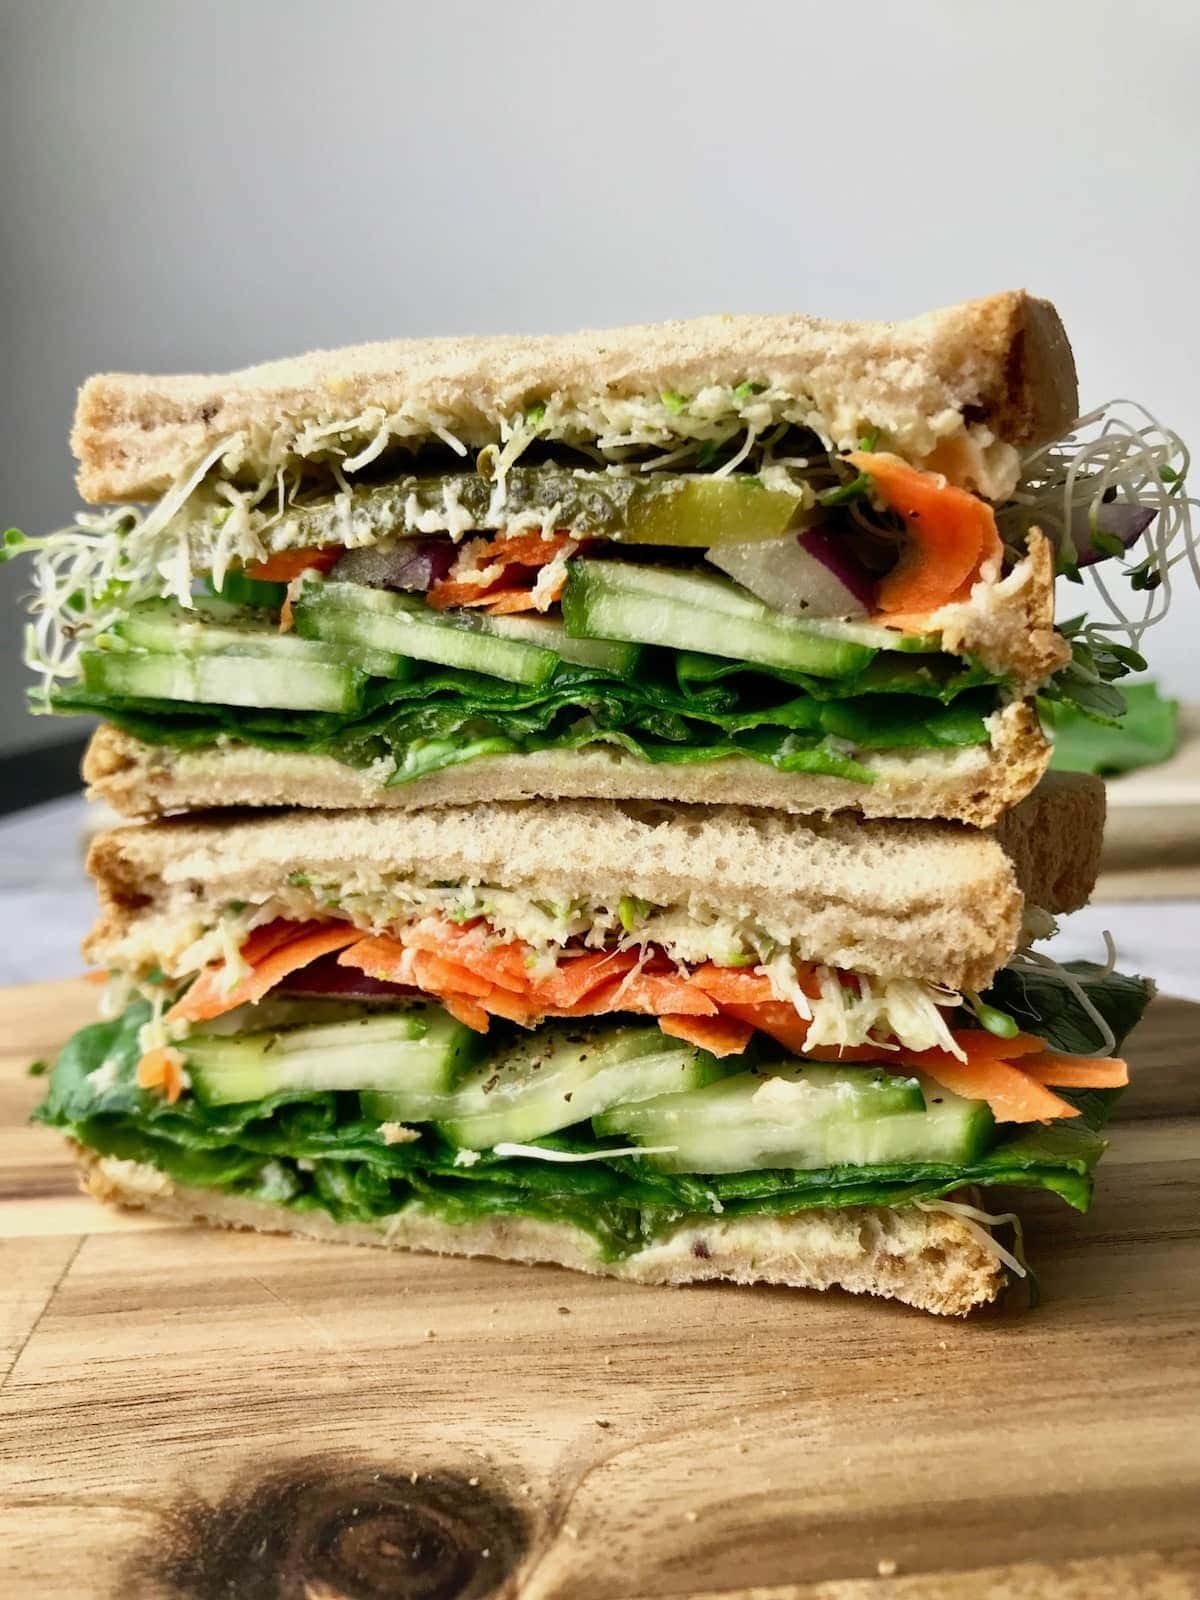 Sandwich with 
thin cucumber slices, romaine lettuce, pickle slices, shredded carrot, alfalfa sprouts, and thinly sliced red onion filling. 